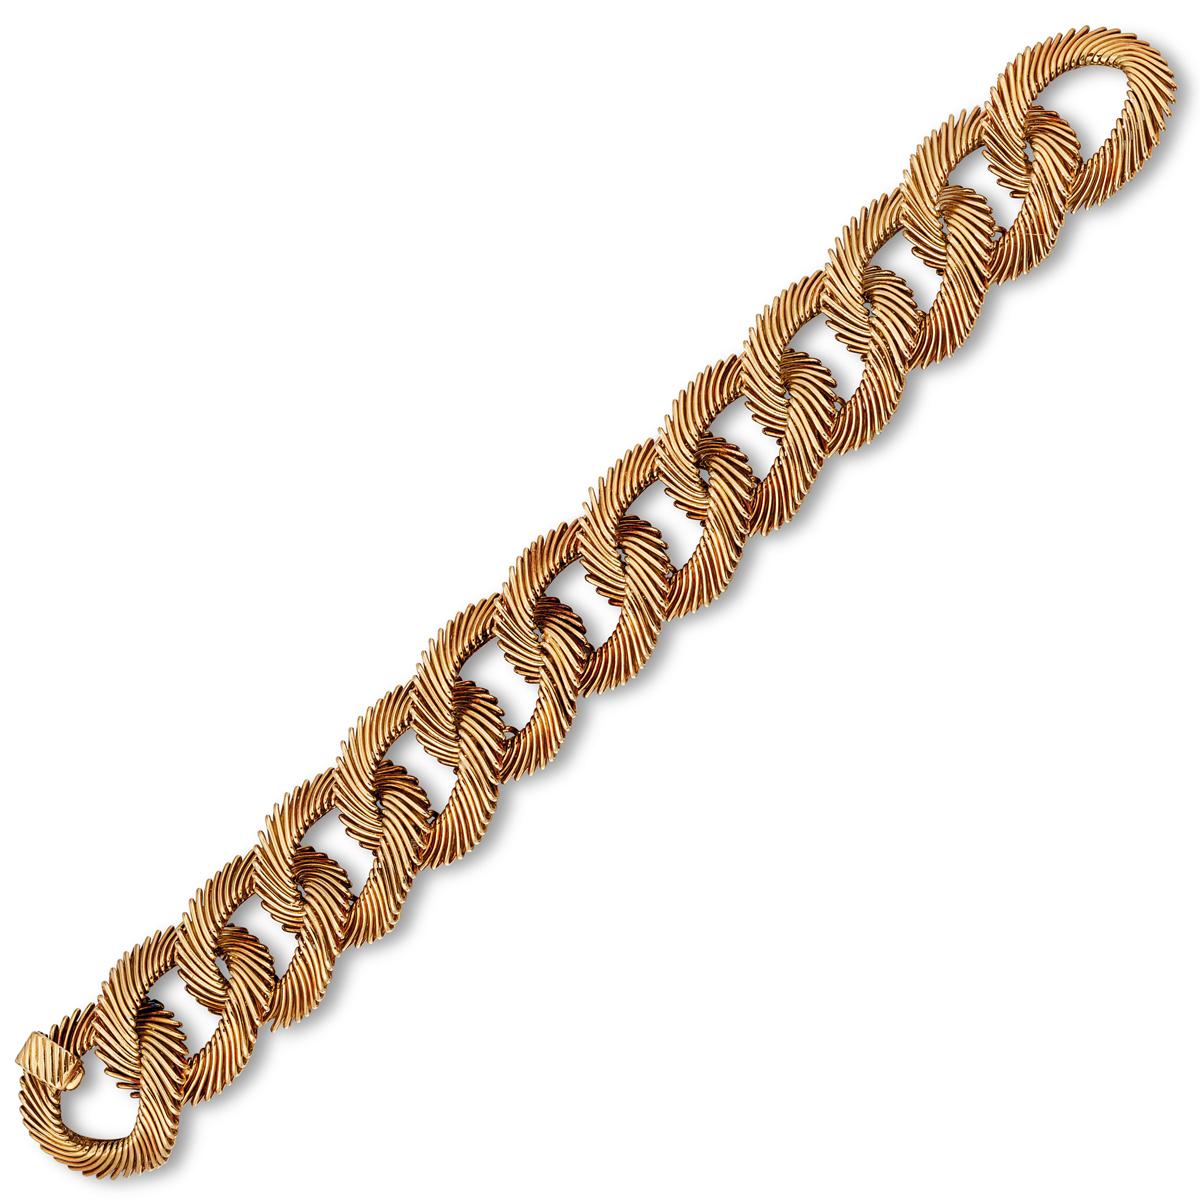 An incredible bracelet by Van Cleef & Arpels designed by Georges L Enfant circa 1960's showcasing an curb designed Angel Hair pattern in 18k yellow gold. The bracelet has an impressive weight of 84.6 grams.

Length : 7.83